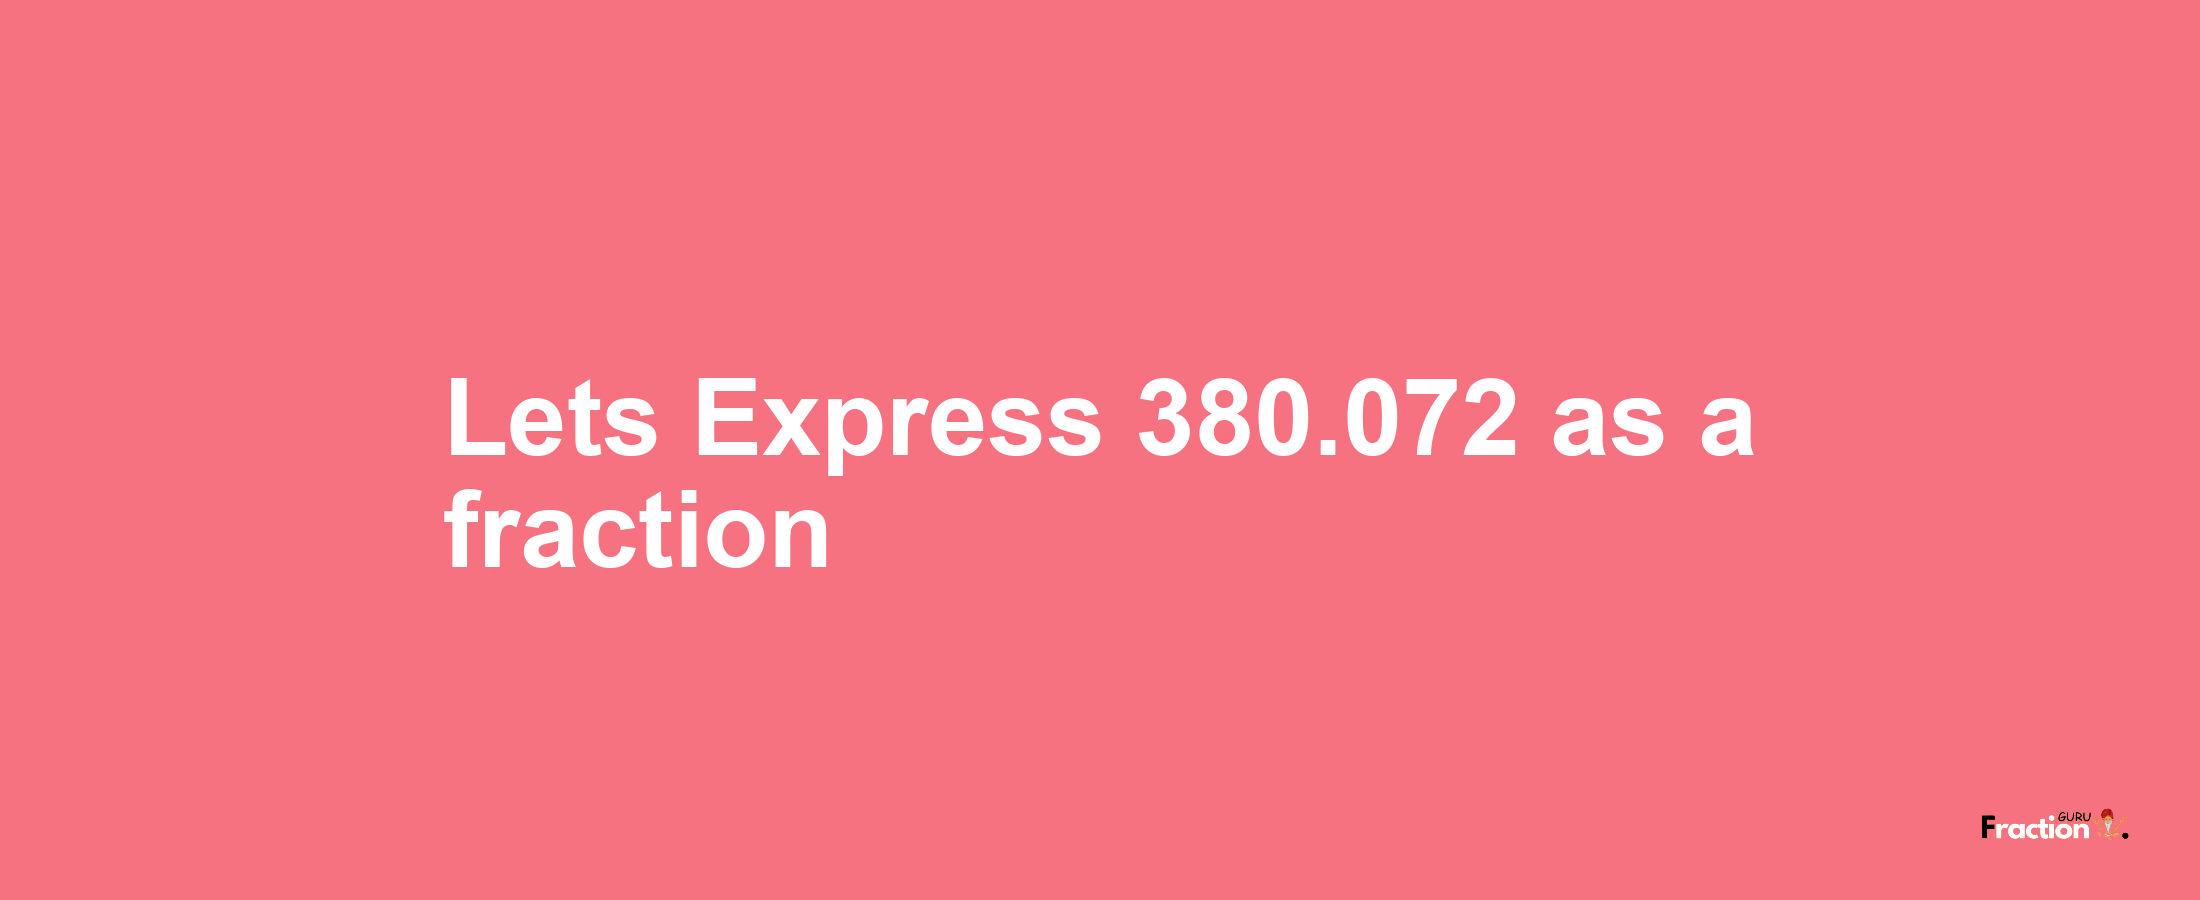 Lets Express 380.072 as afraction